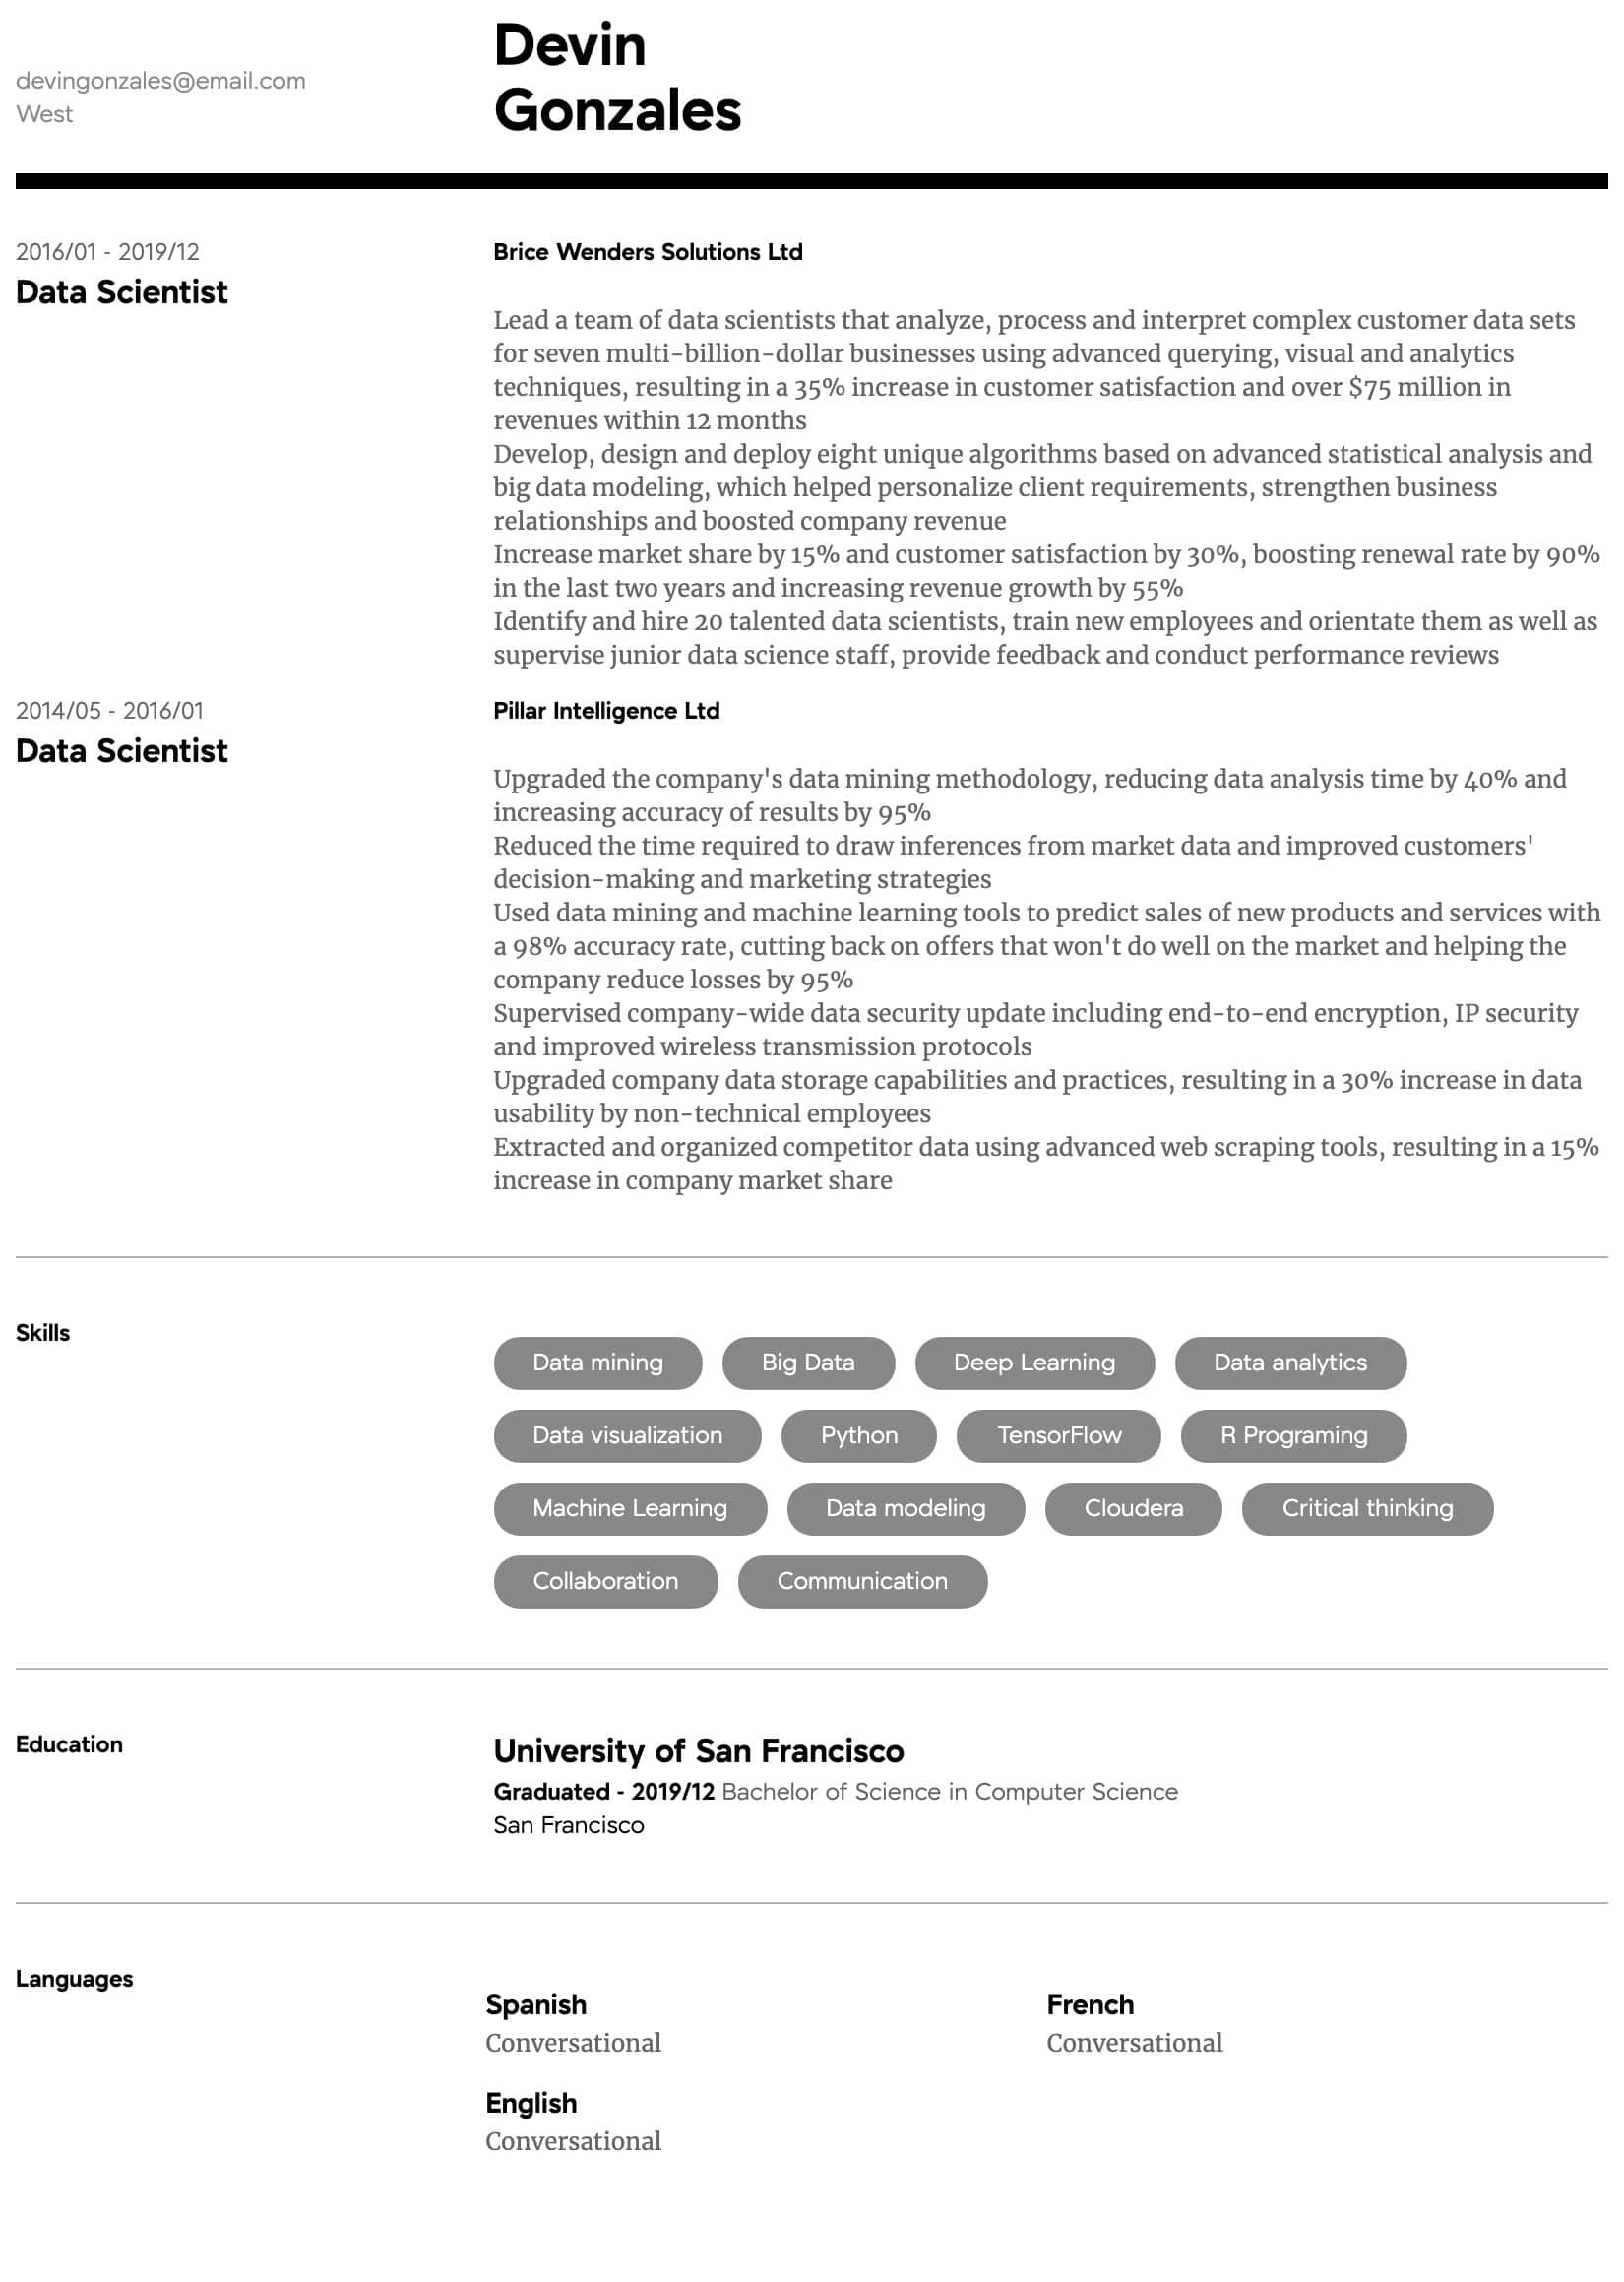 Data Science Resume Sample for Experienced Data Scientist Resume Samples All Experience Levels Resume.com …